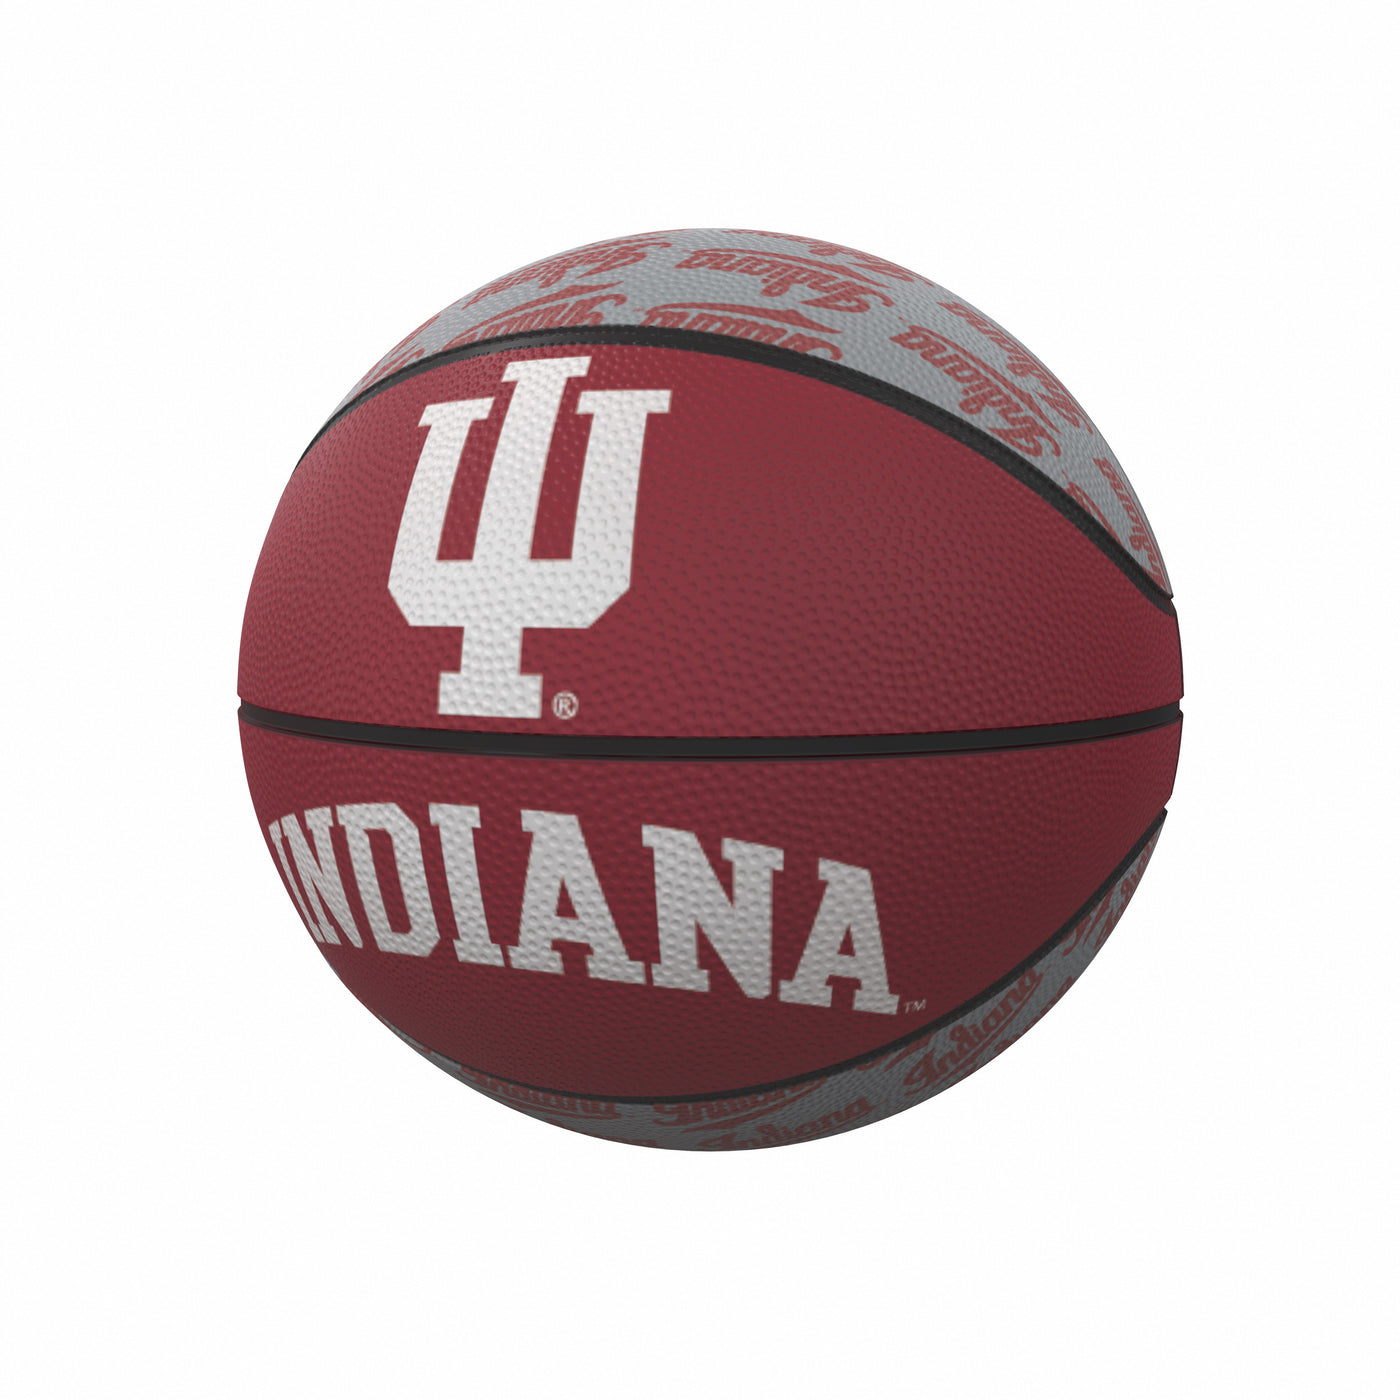 Indiana Repeating Logo Mini-Size Rubber Basketball